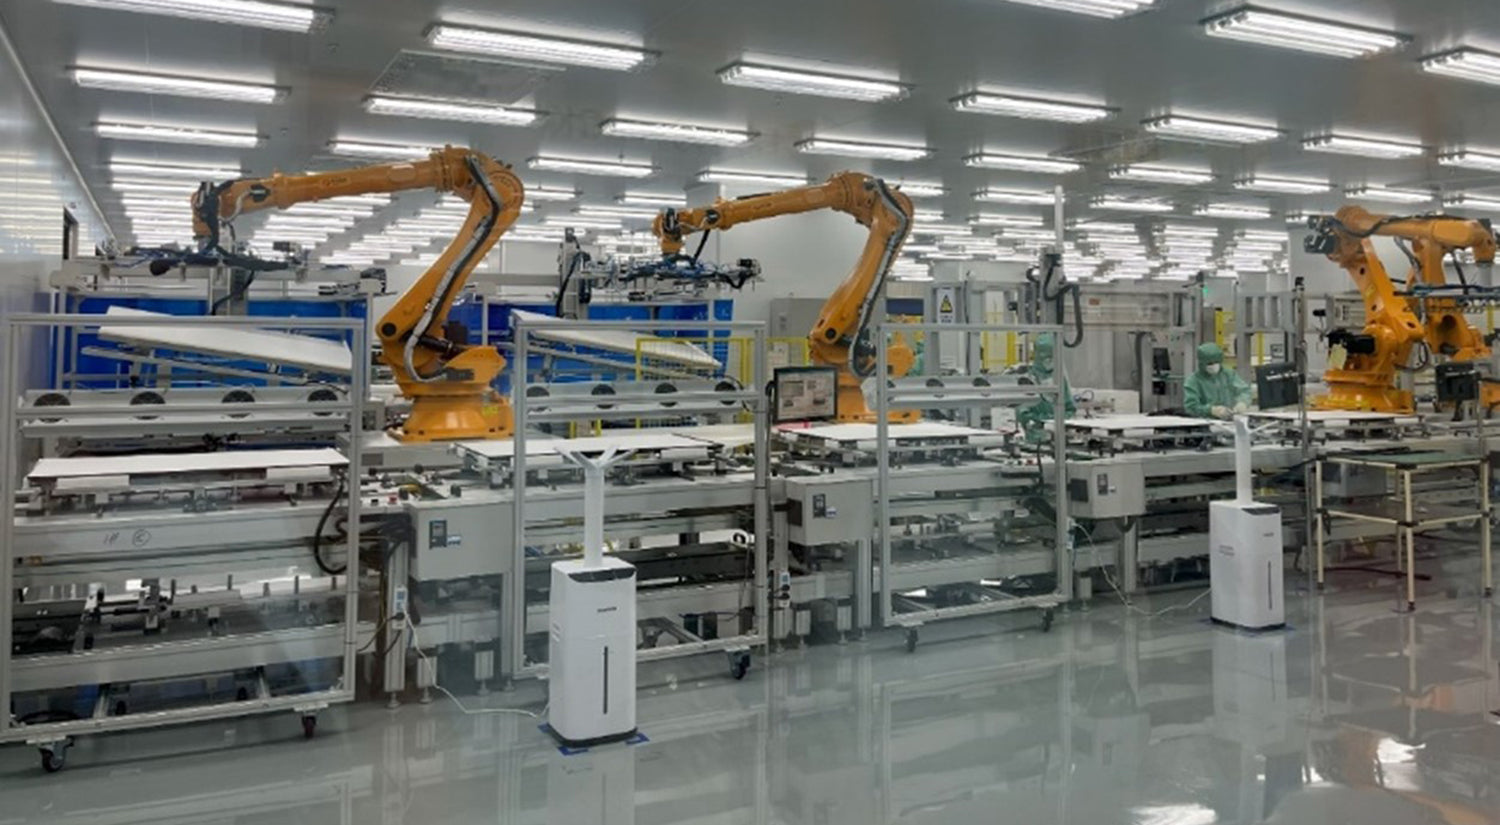 Express LUCK is equipped with automated machinery to supports Industry 4.0 level production lines